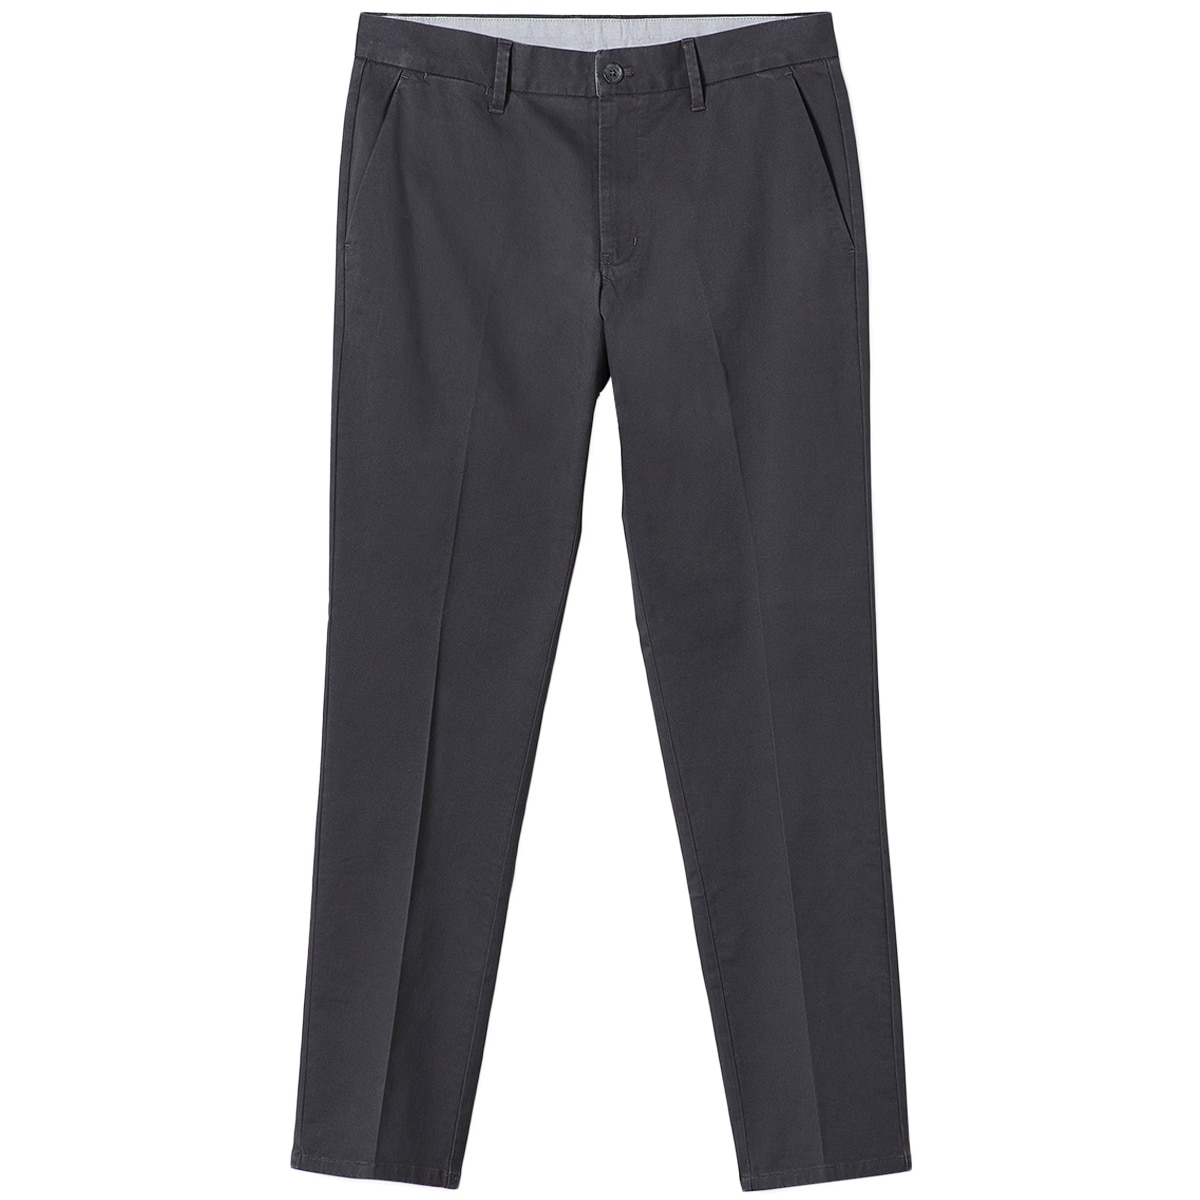 Calvin Klein Men's Stretch Chino Pant Charcoal | Costco A...